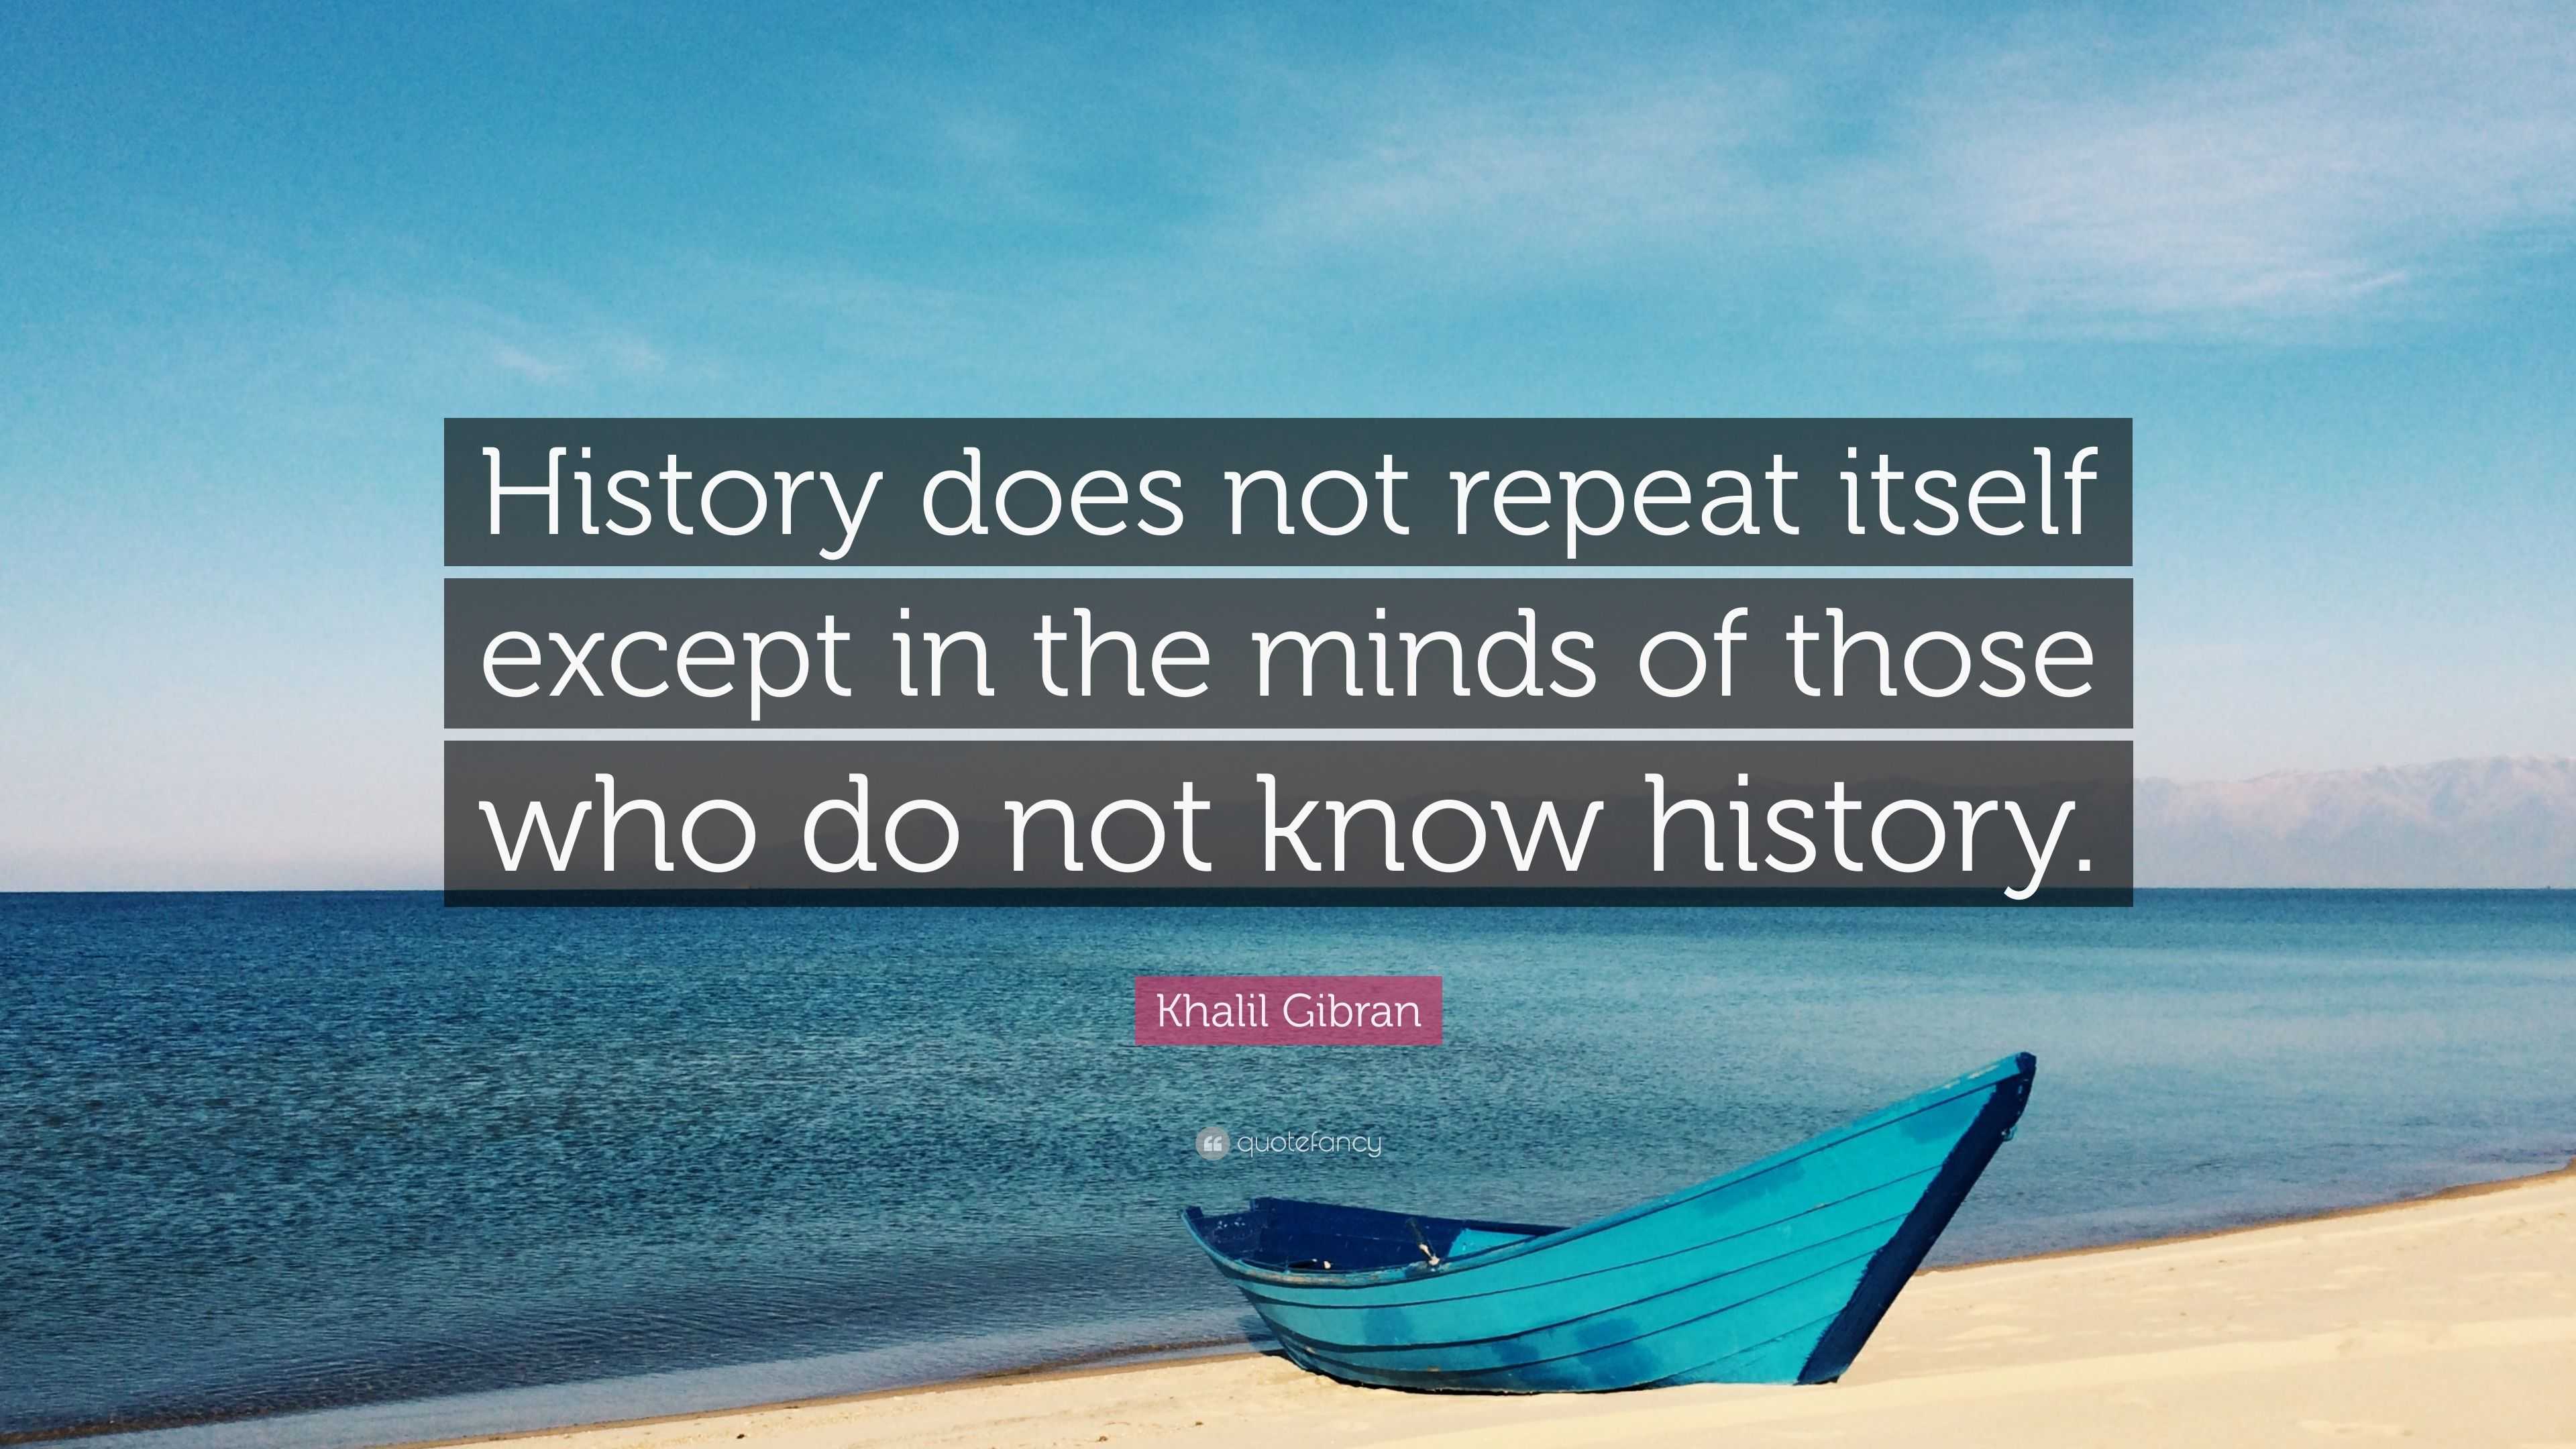 Khalil Gibran Quote “History does not repeat itself except in the